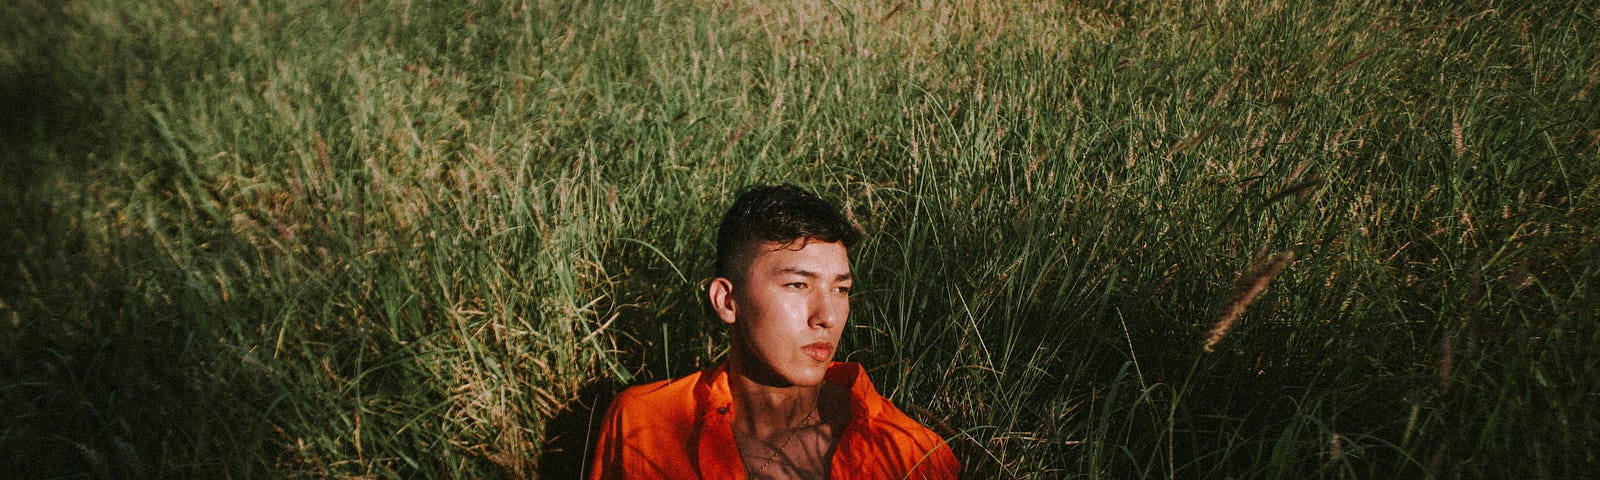 A young man in a field of tall grass, half sitting up and looking off to the side.